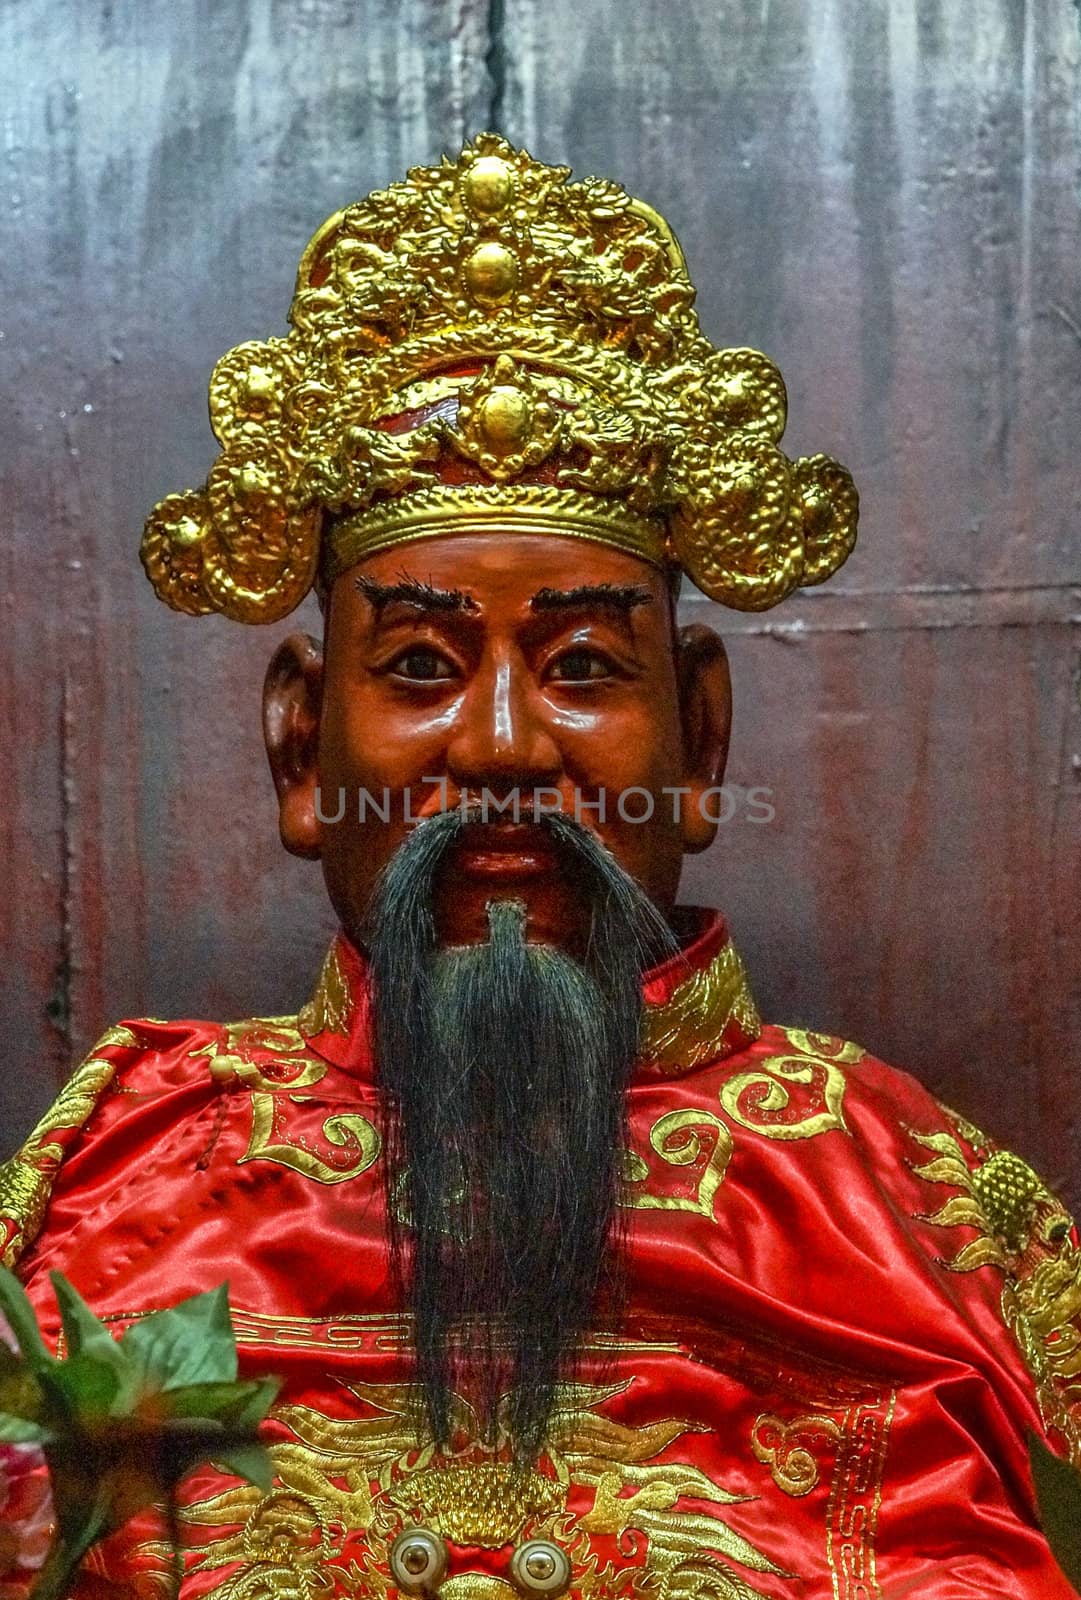 Vietnam Hanoi. Close up of bearded face with decorations in gold and red.